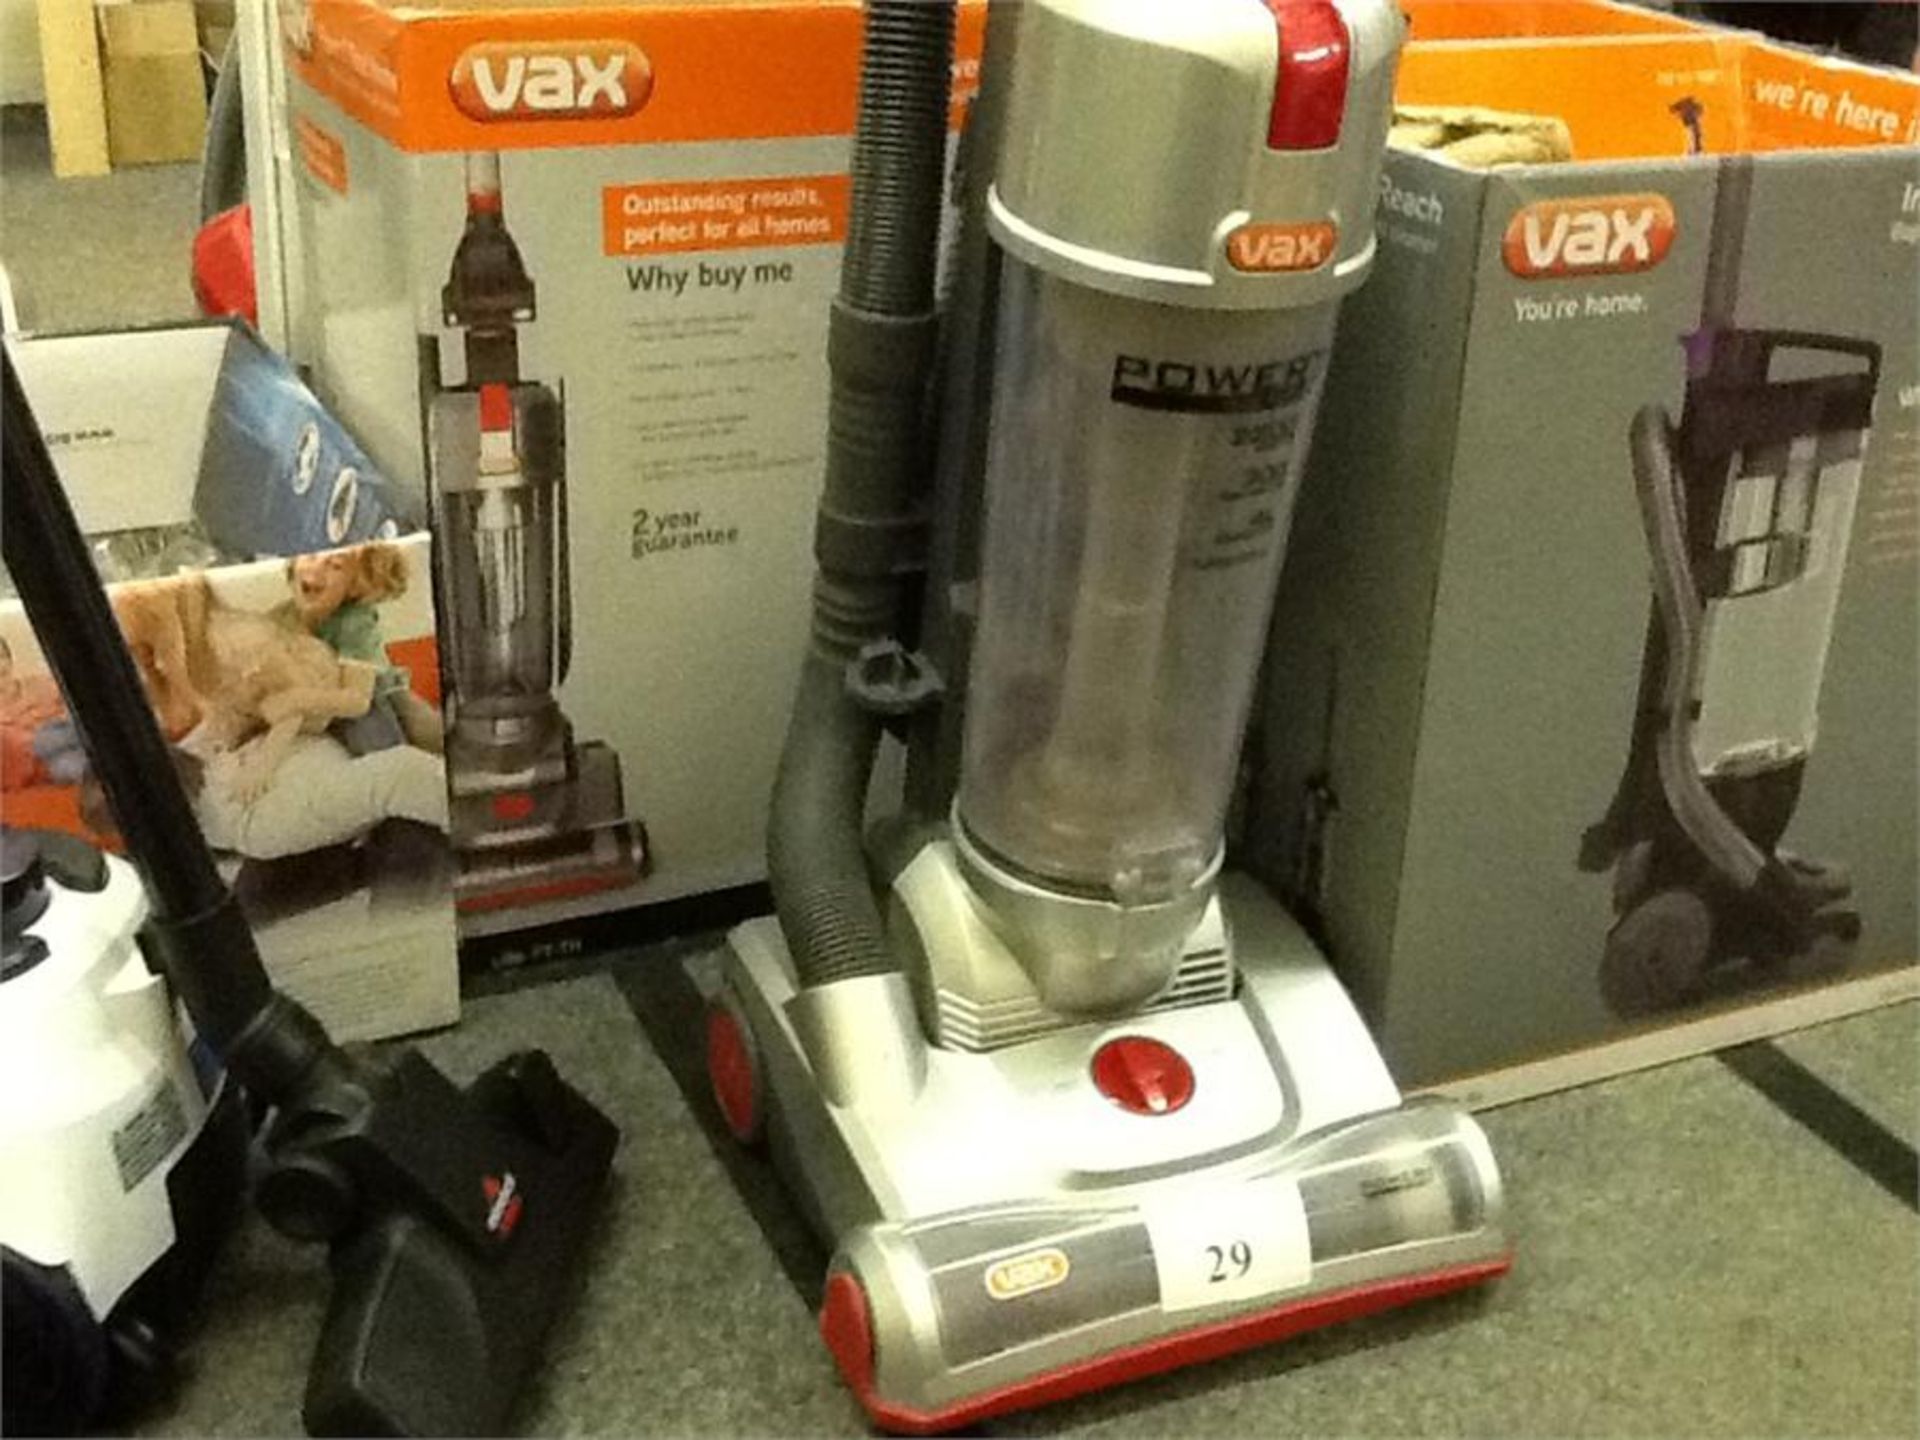 Vax power 7 upright vacume cleanerWorking. Boxed